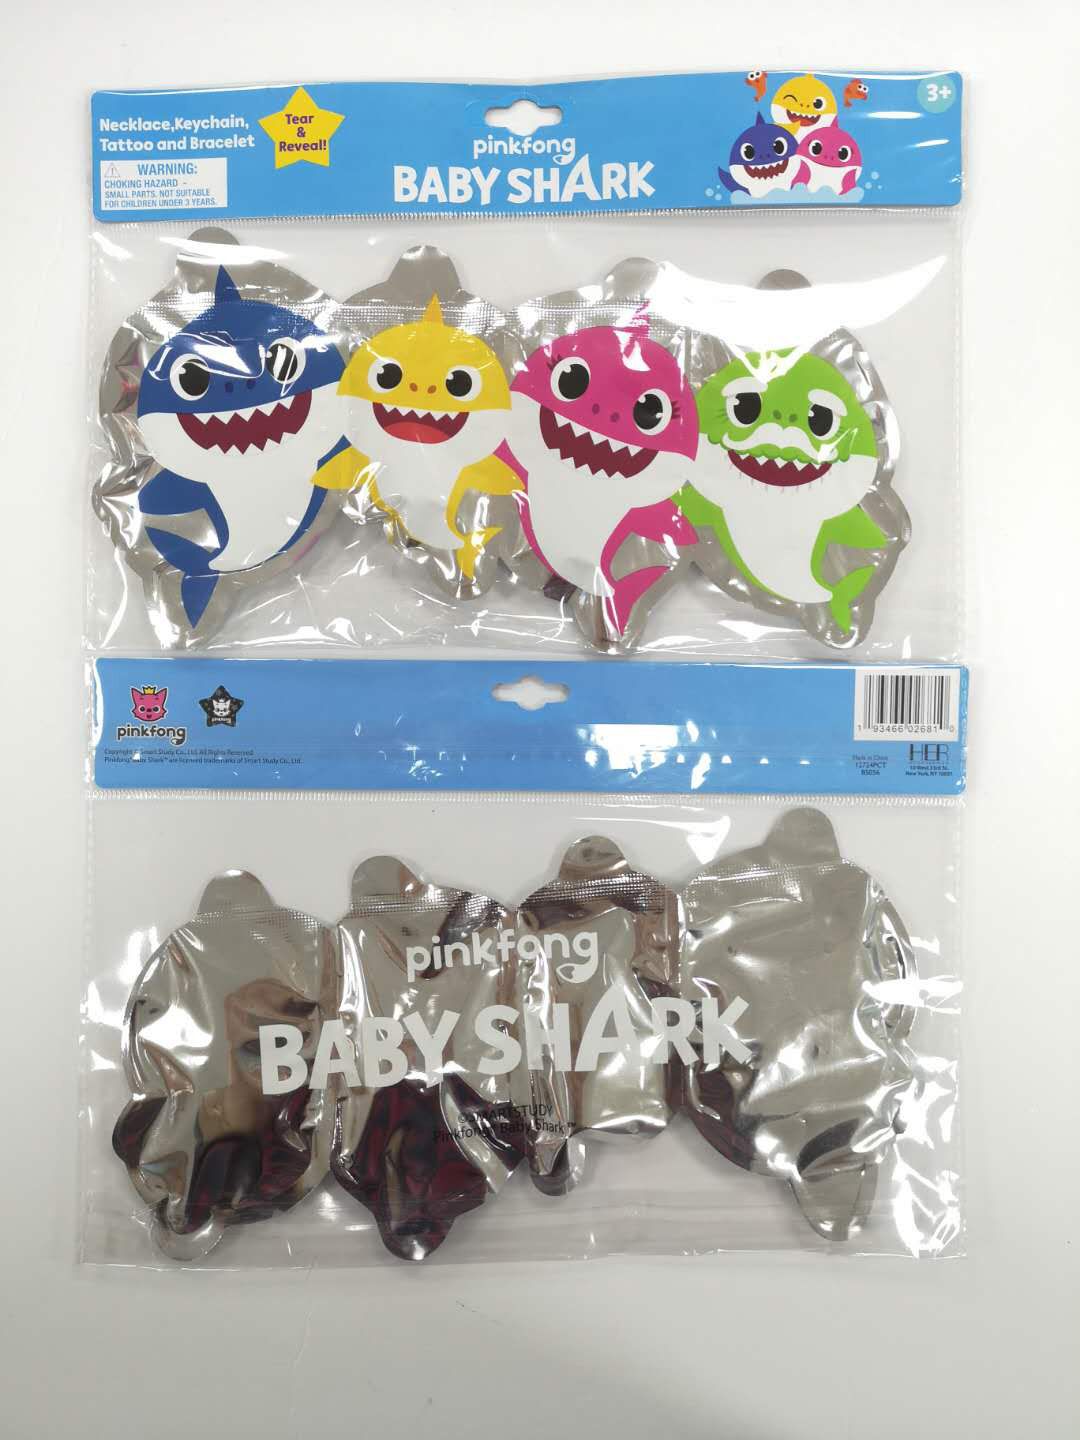 Baby Shark Birthday Party Decorations Include 2 Pack Metallic Foil Fringe,  Silver Letter Doo Doo, 2 Foil Shark Balloons,12 Latex Balloons And 6